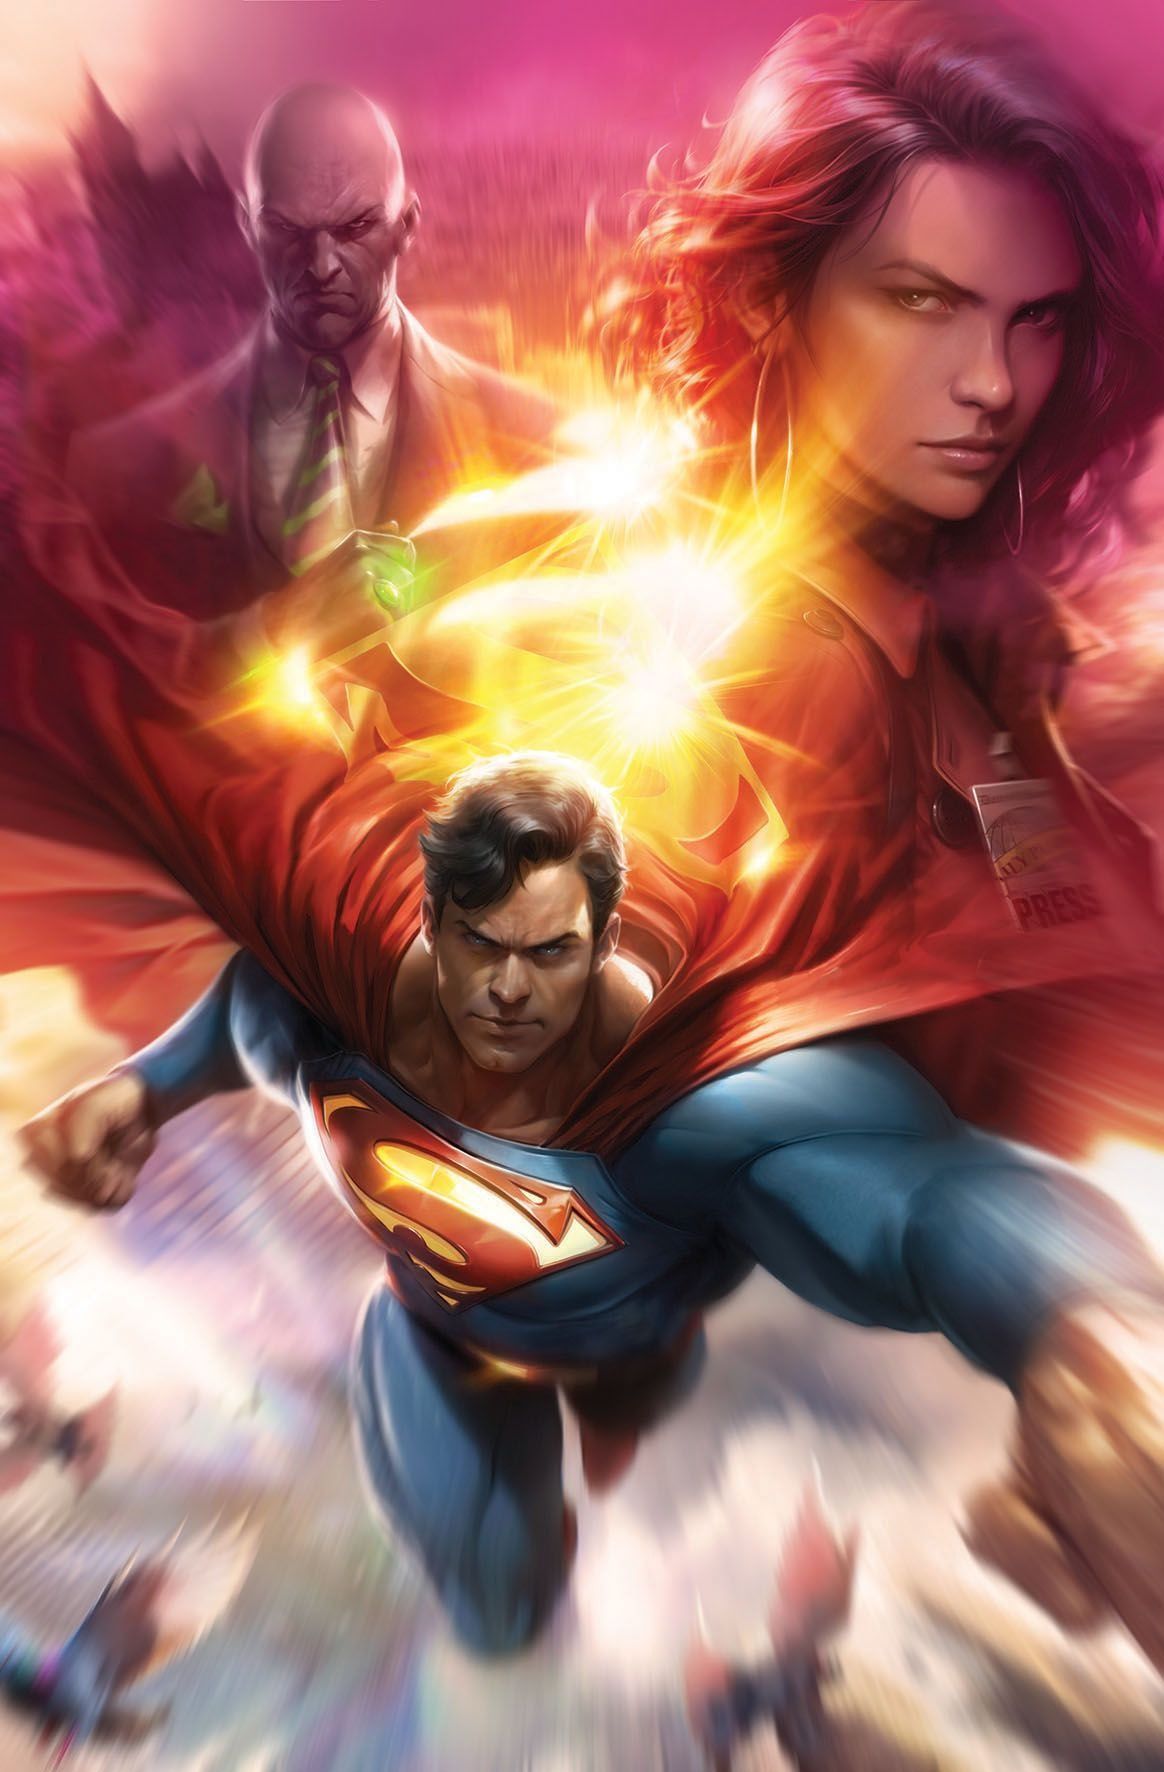 The variant cover for Action Comics #1069